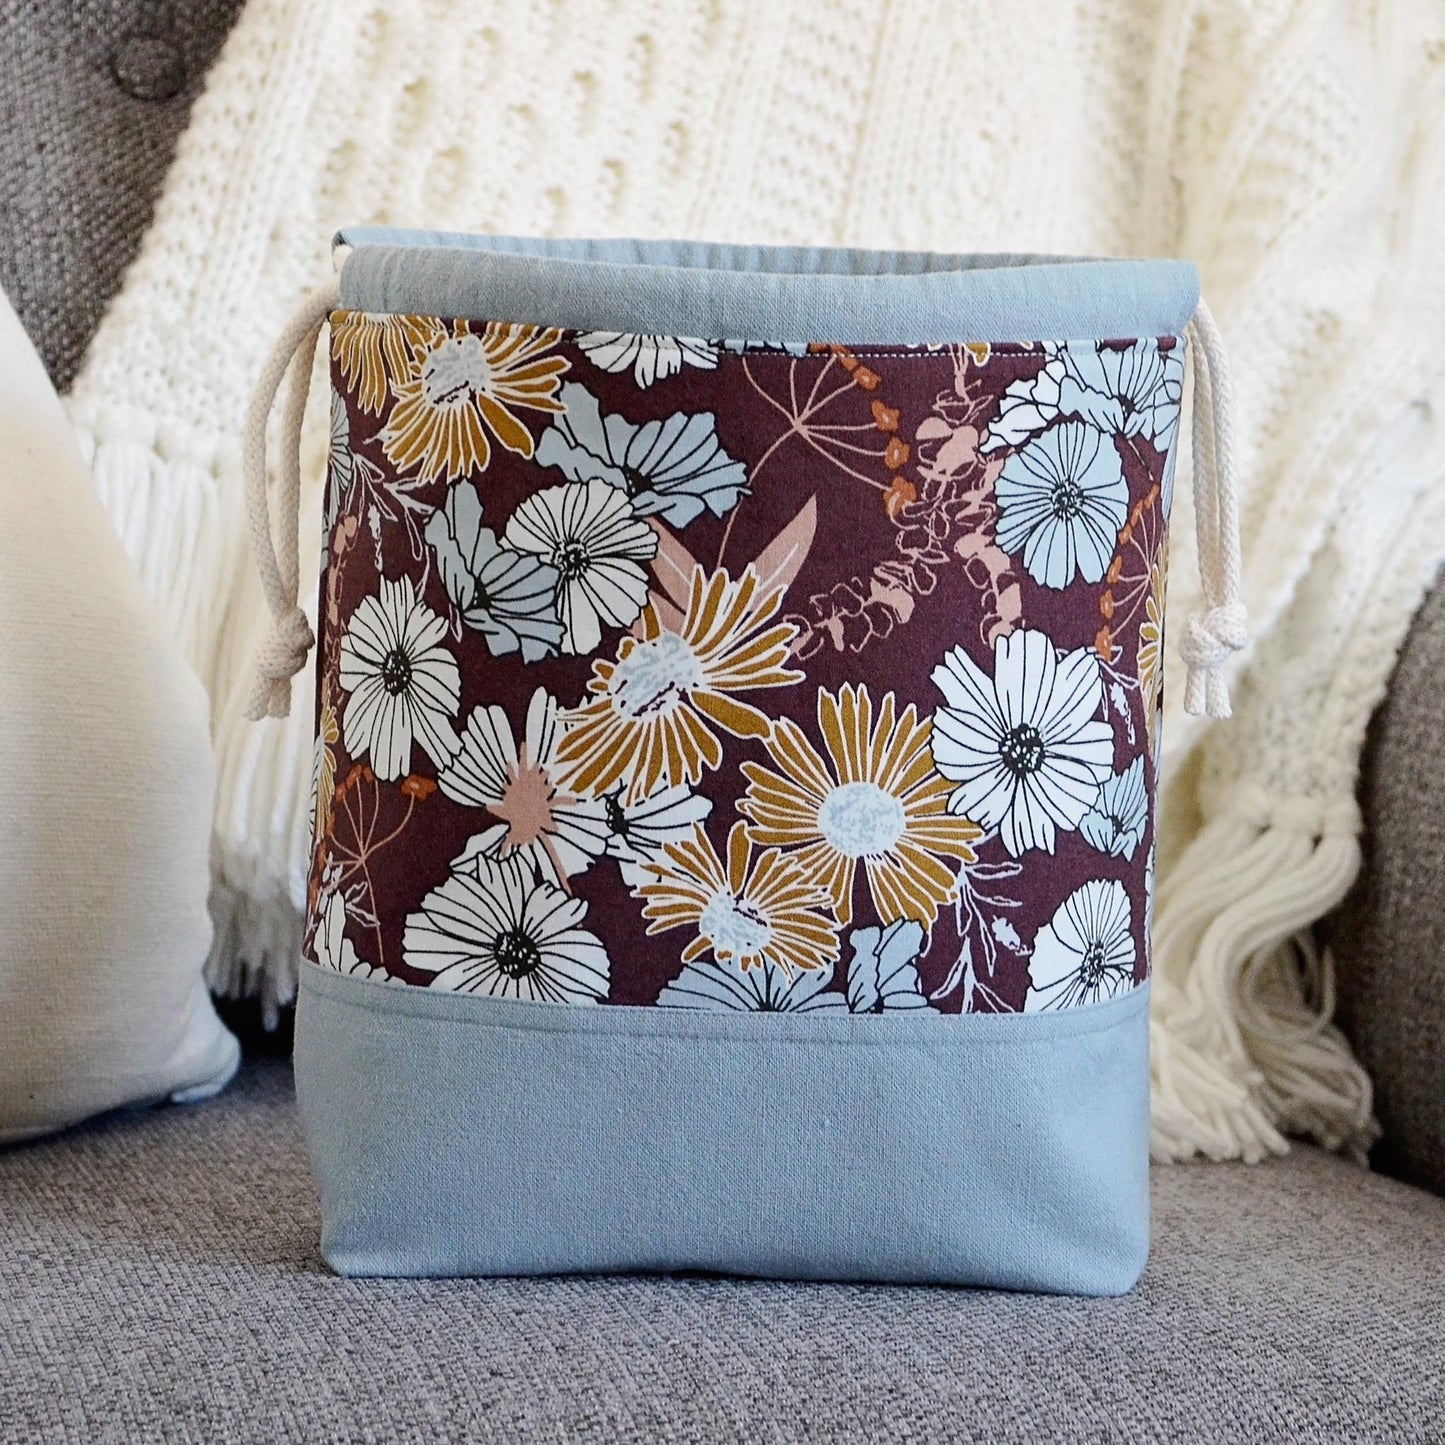 Small floral project bag for knitting or crochet in blues and browns.  Made in Nova Scotia, Canada.